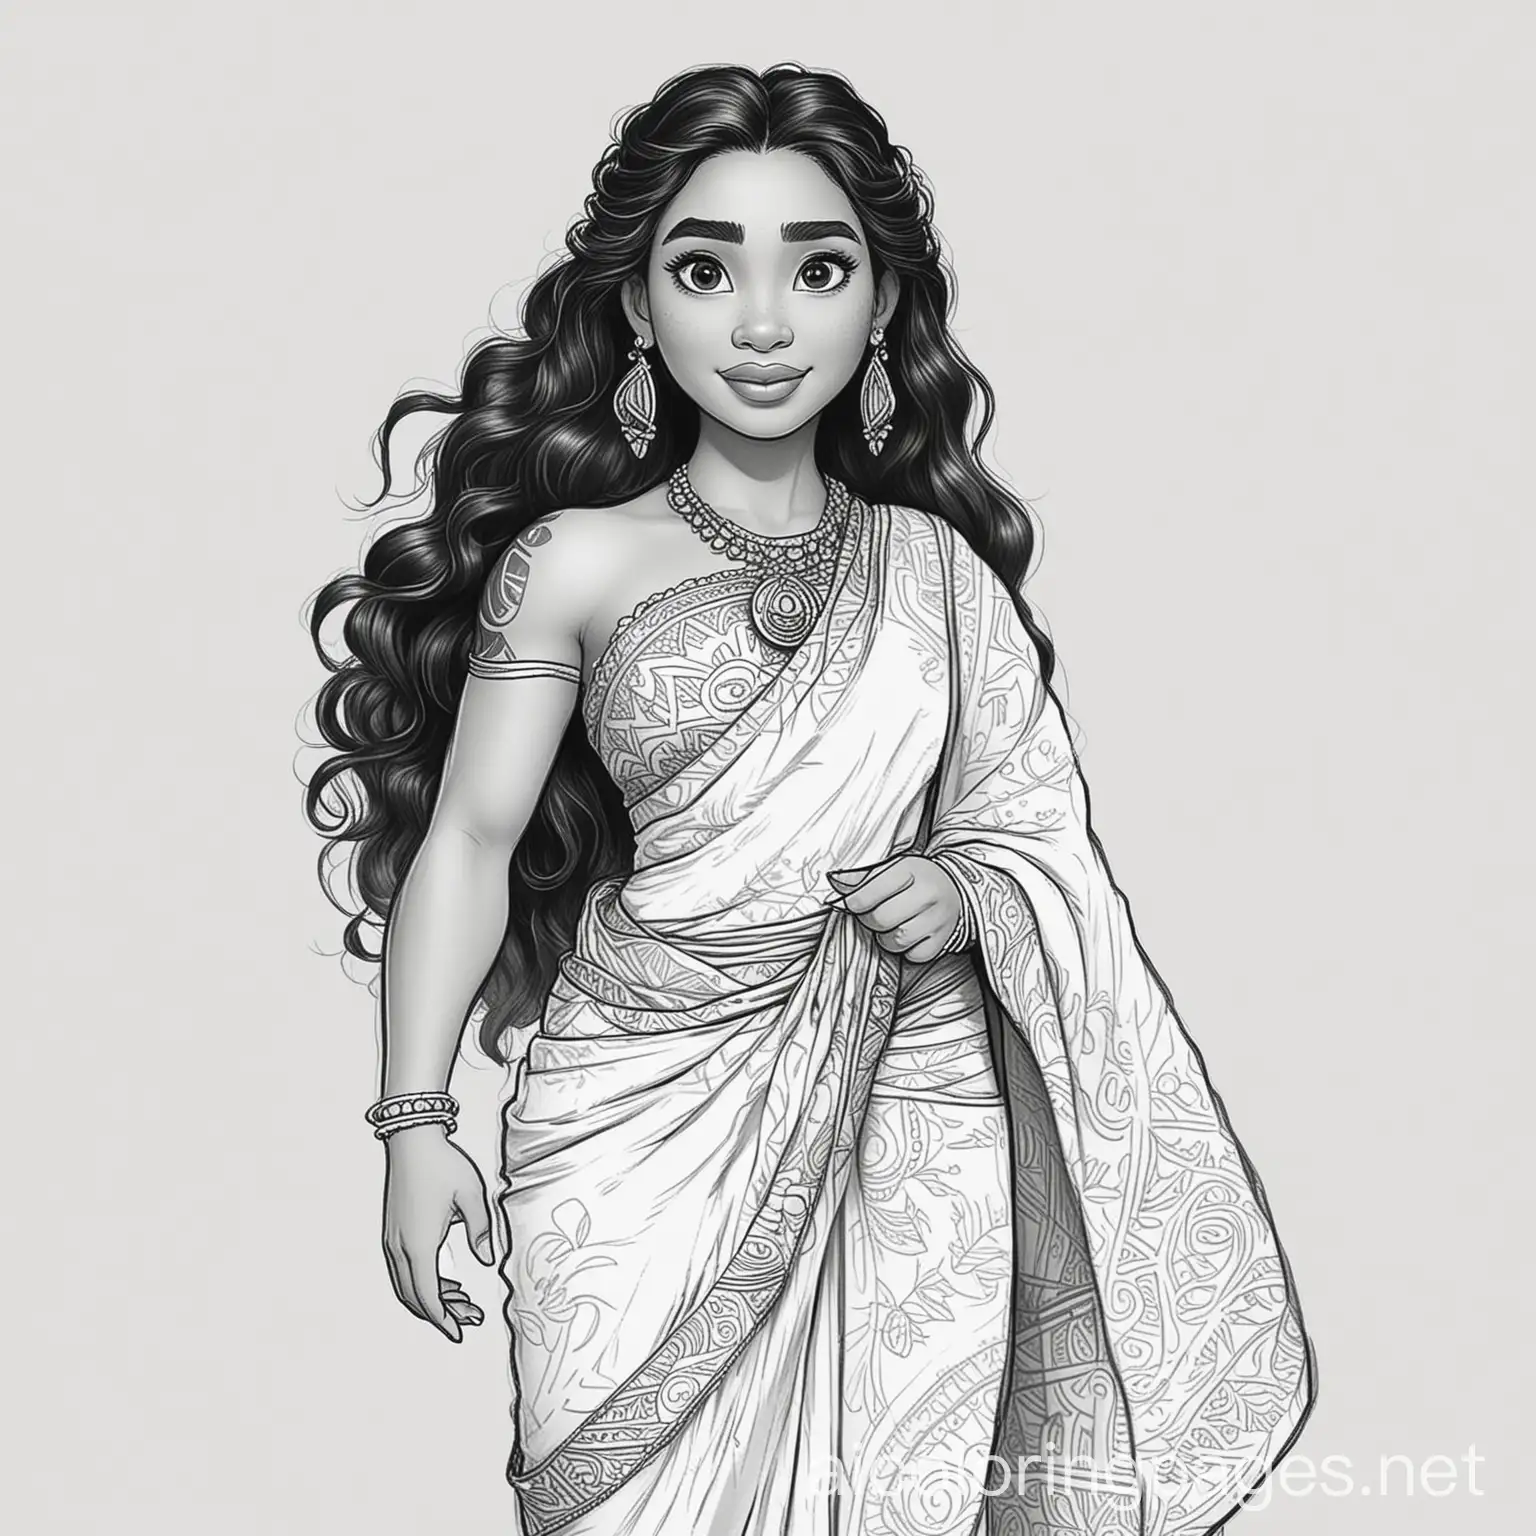 Princess-Moana-Coloring-Page-with-Sari-on-White-Background